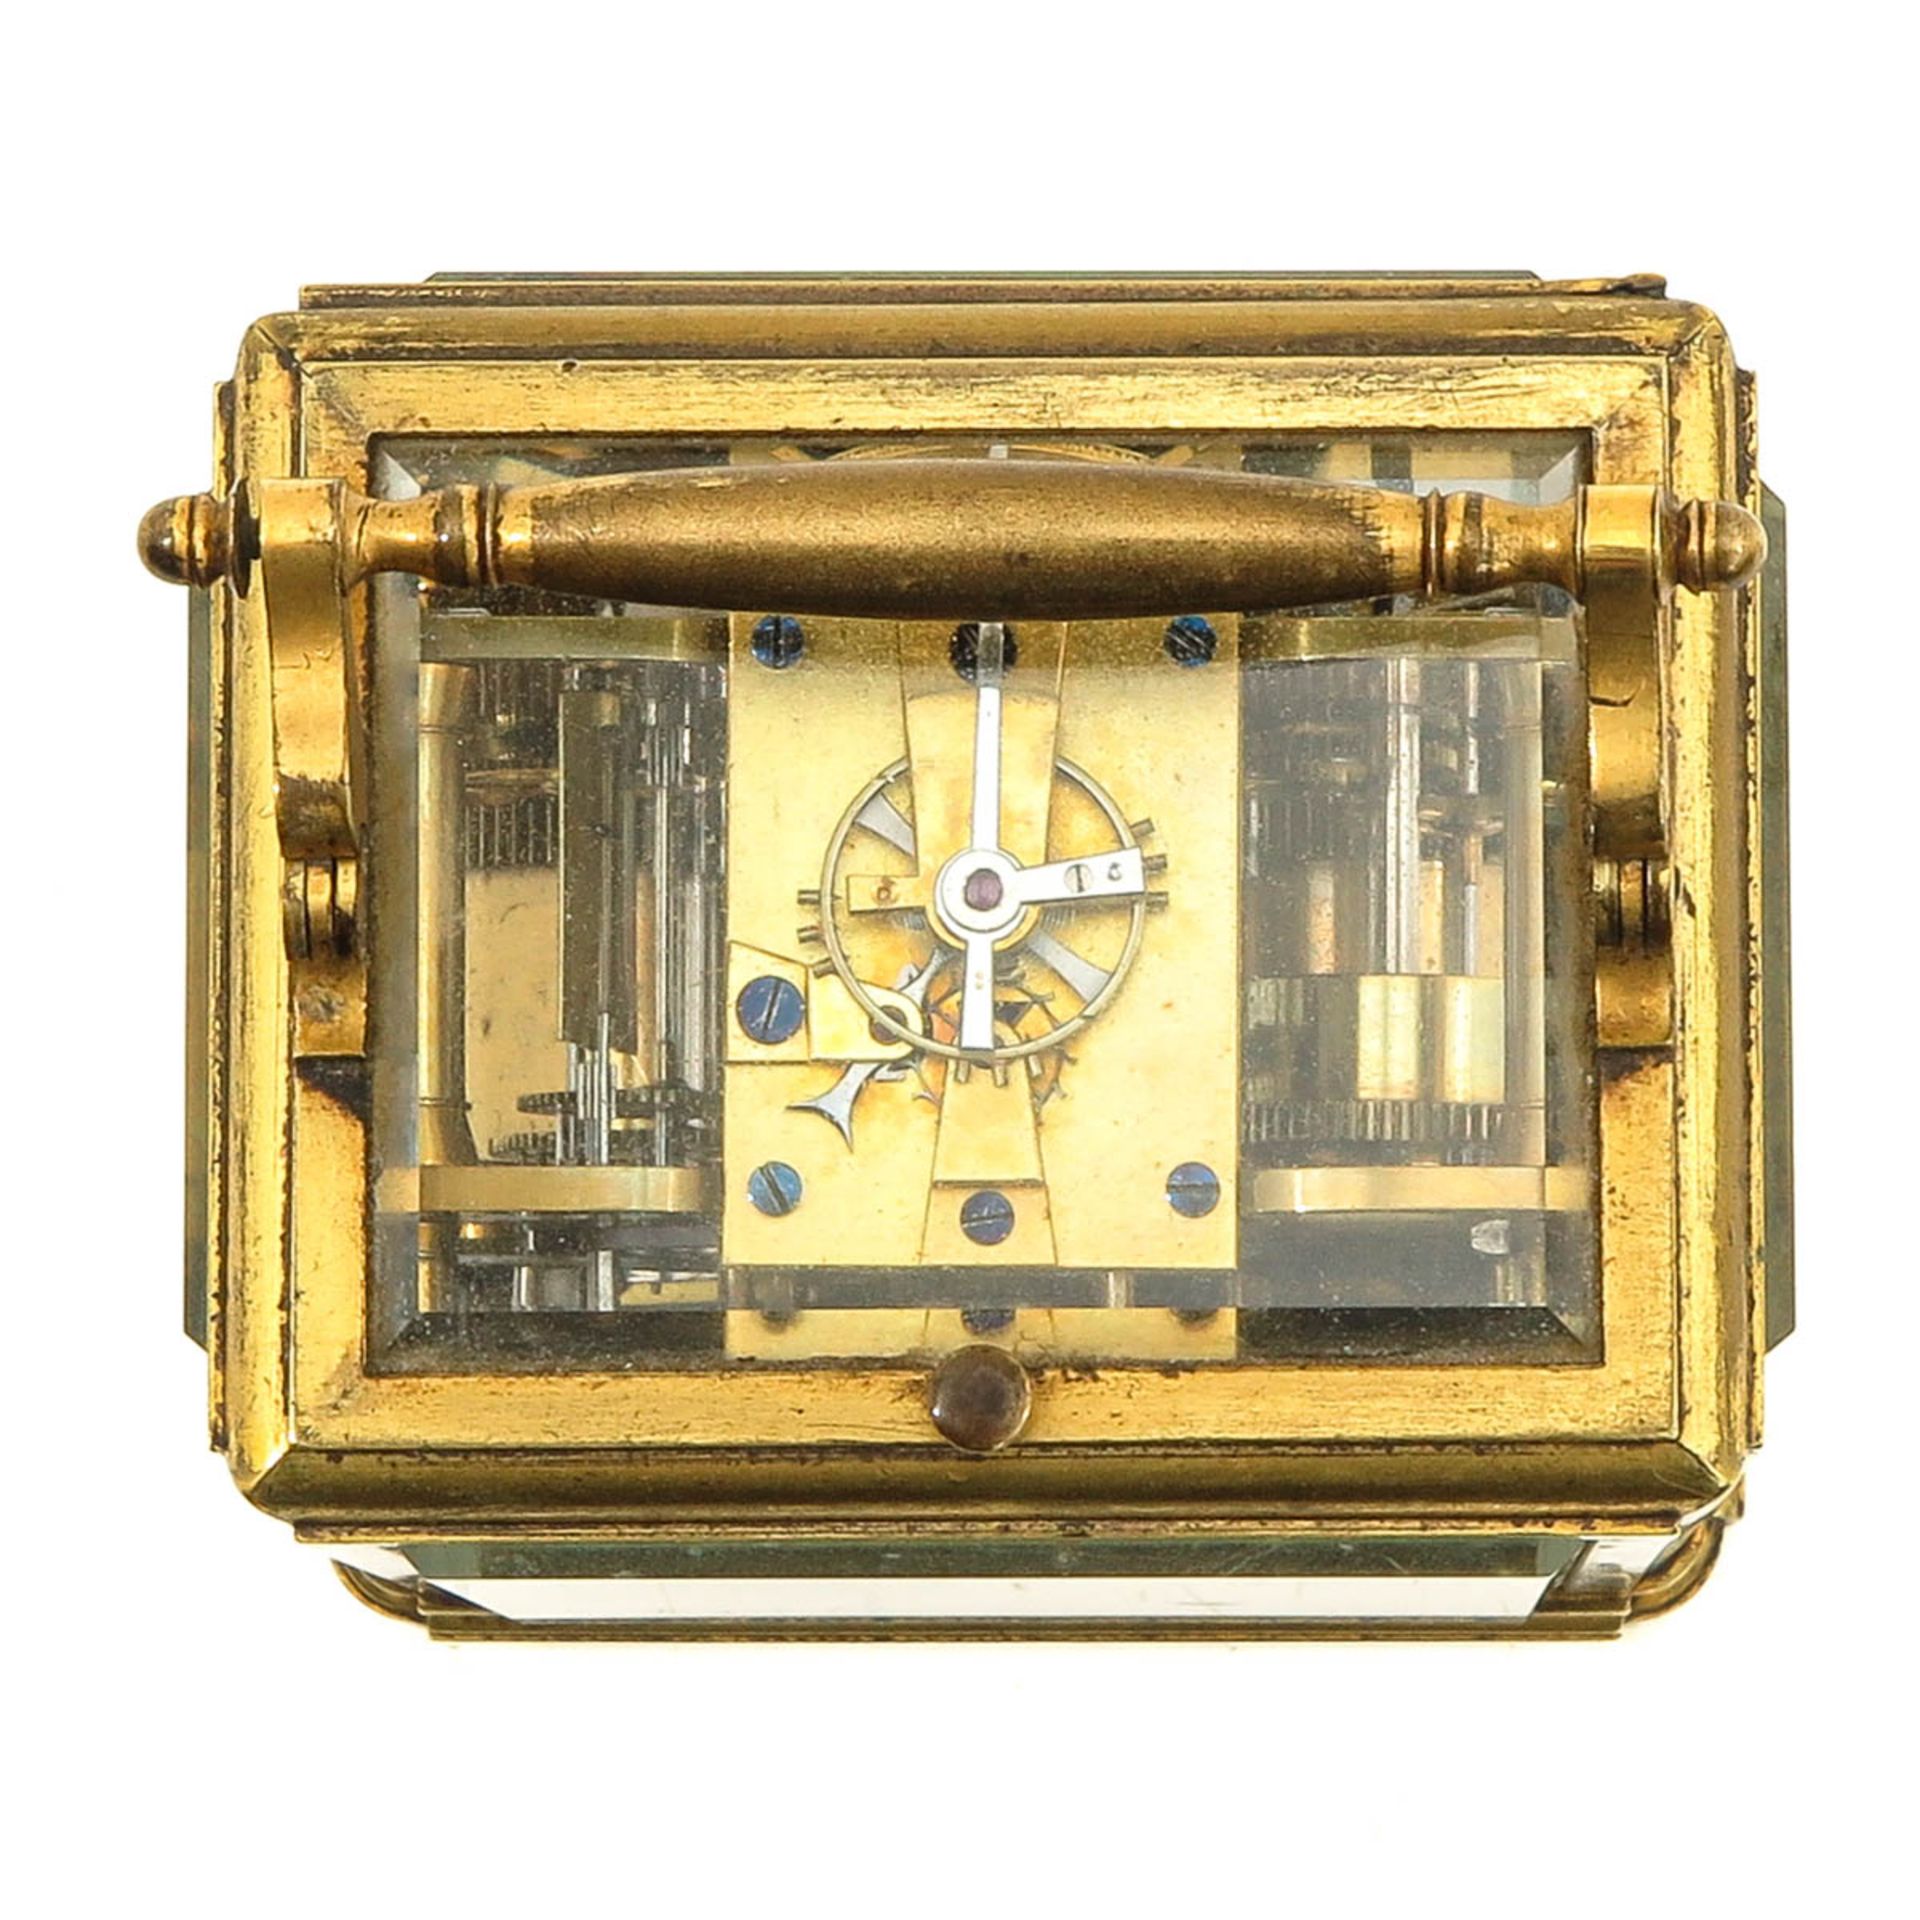 Carriage clock - Image 5 of 9